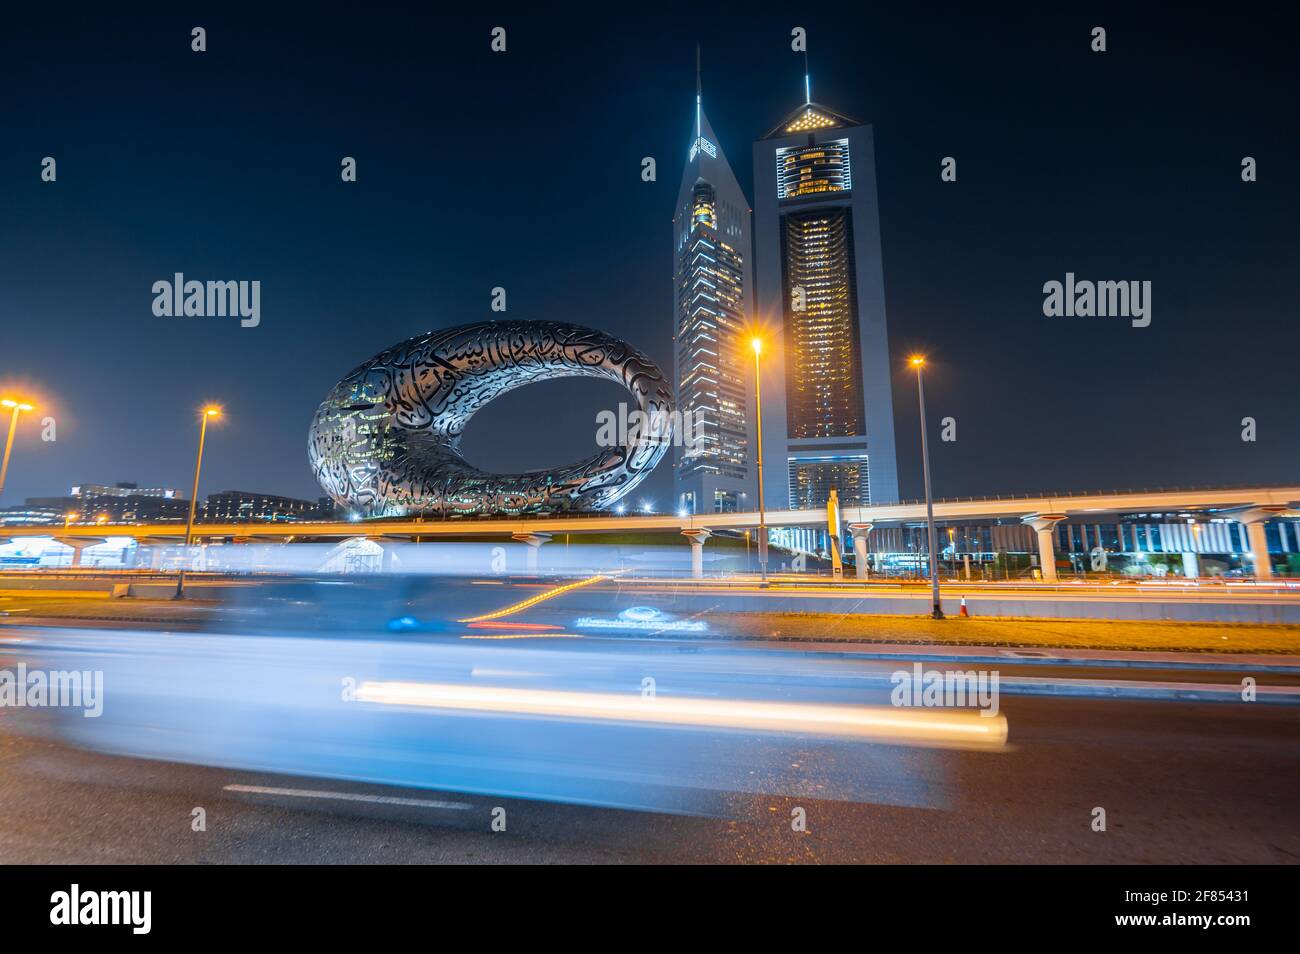 Dubai, United Arab Emirates - March 31, 2021: The Museum of The Future in Dubai downtown built for EXPO 2020 scheduled to be held in 2021 in the Unite Stock Photo